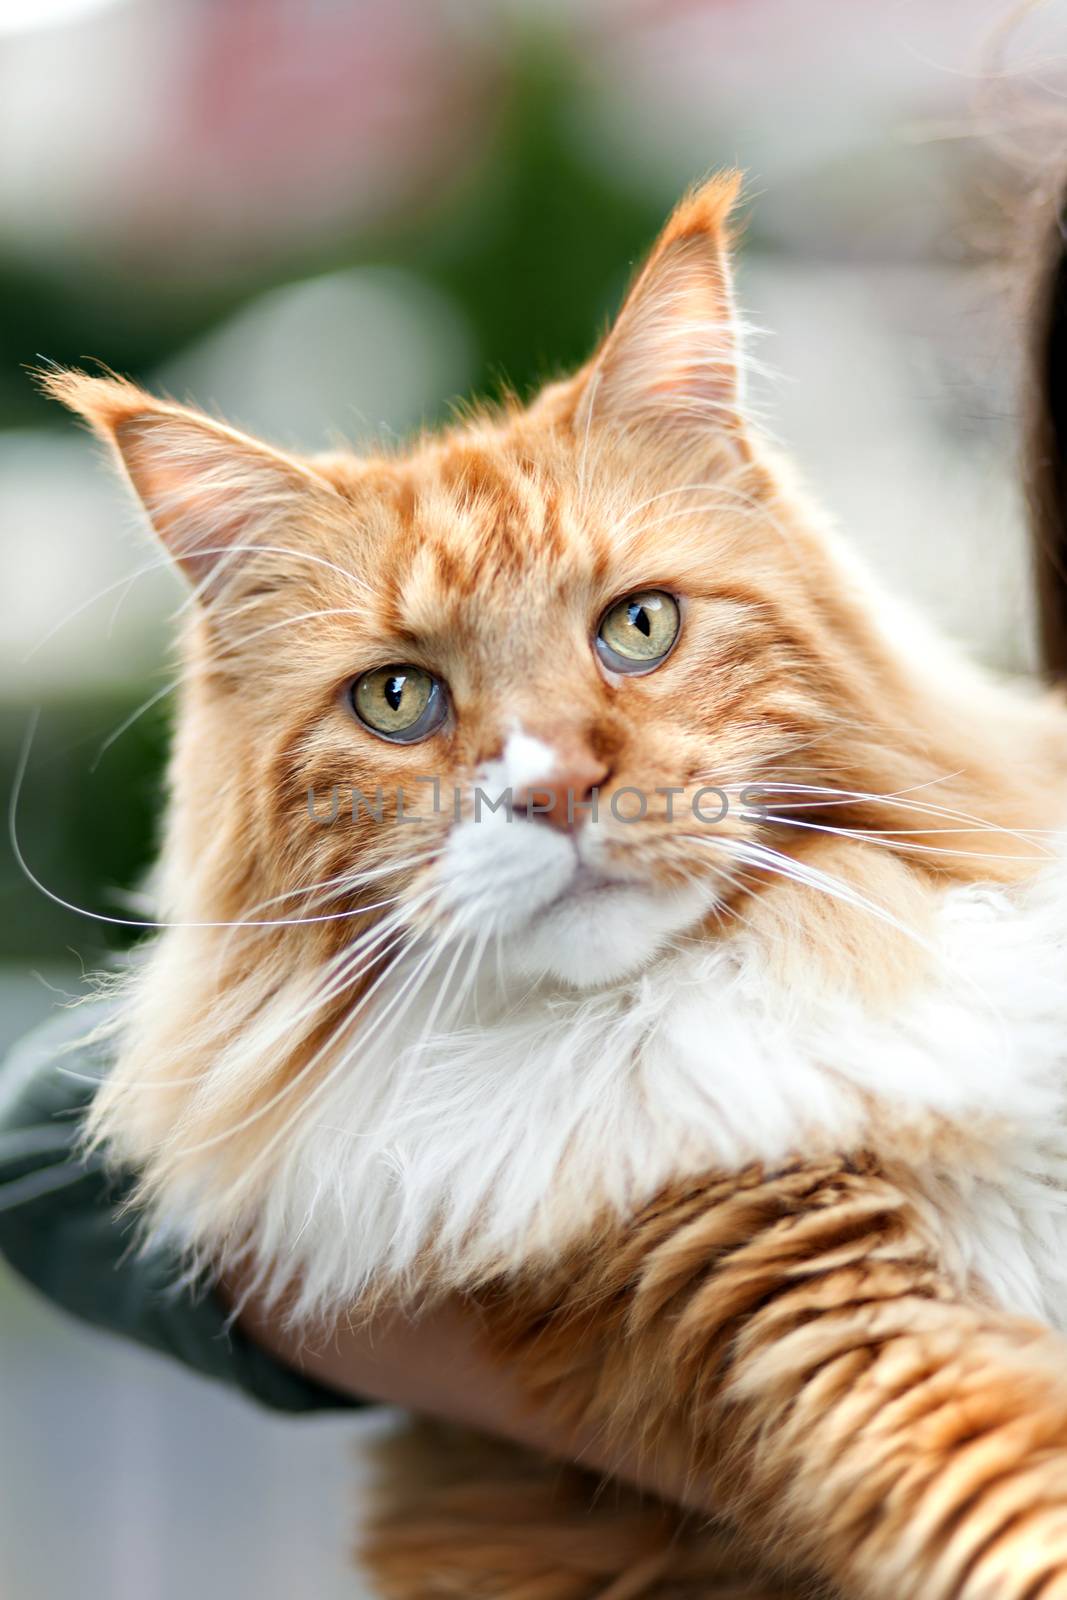 Maine Coon Cat by graficallyminded